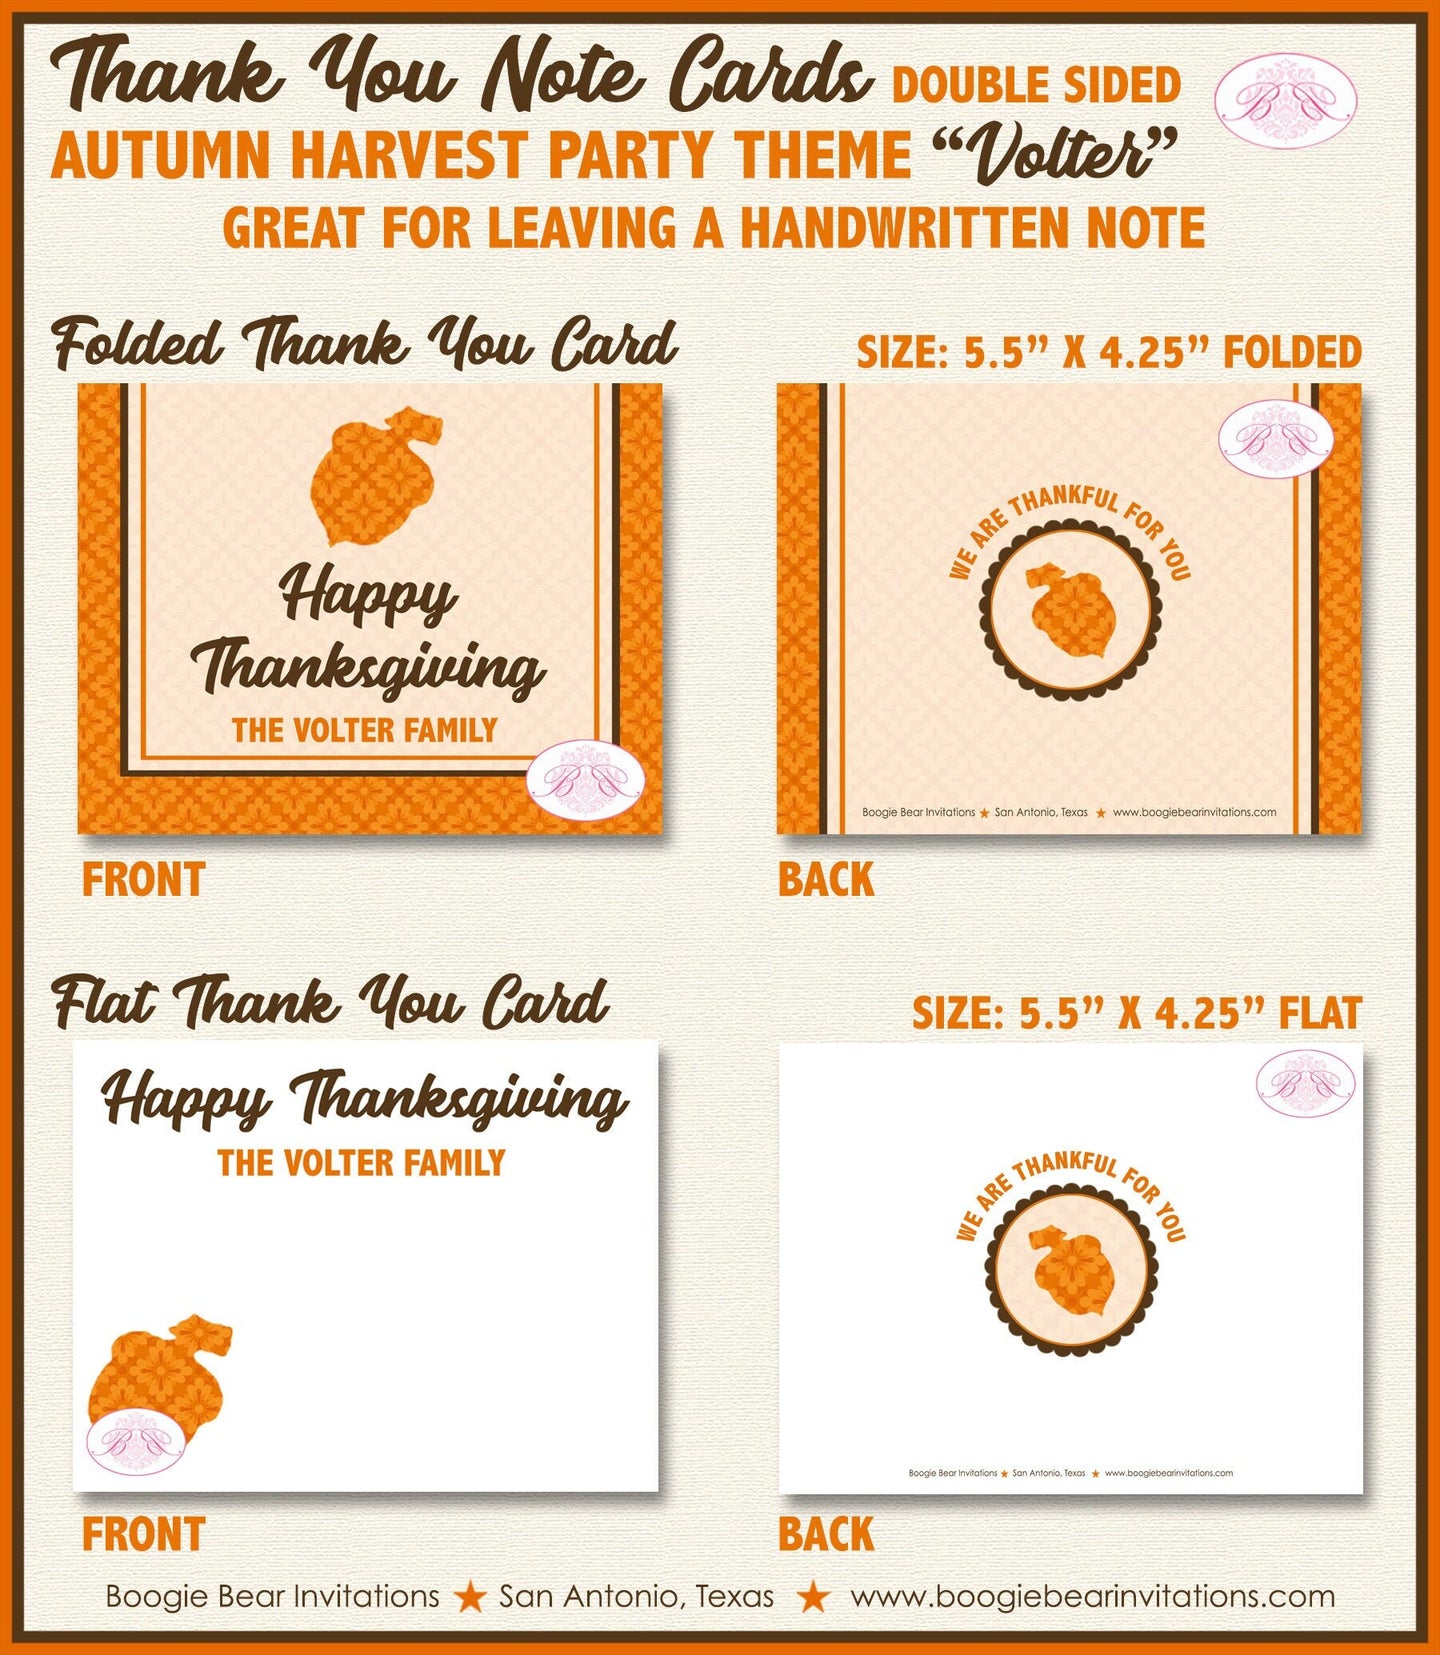 Thanksgiving Dinner Thank You Cards Flat Folded Note Autumn Fall Harvest Brown Orange Retro 1st Boogie Bear Invitations Volter Theme Printed